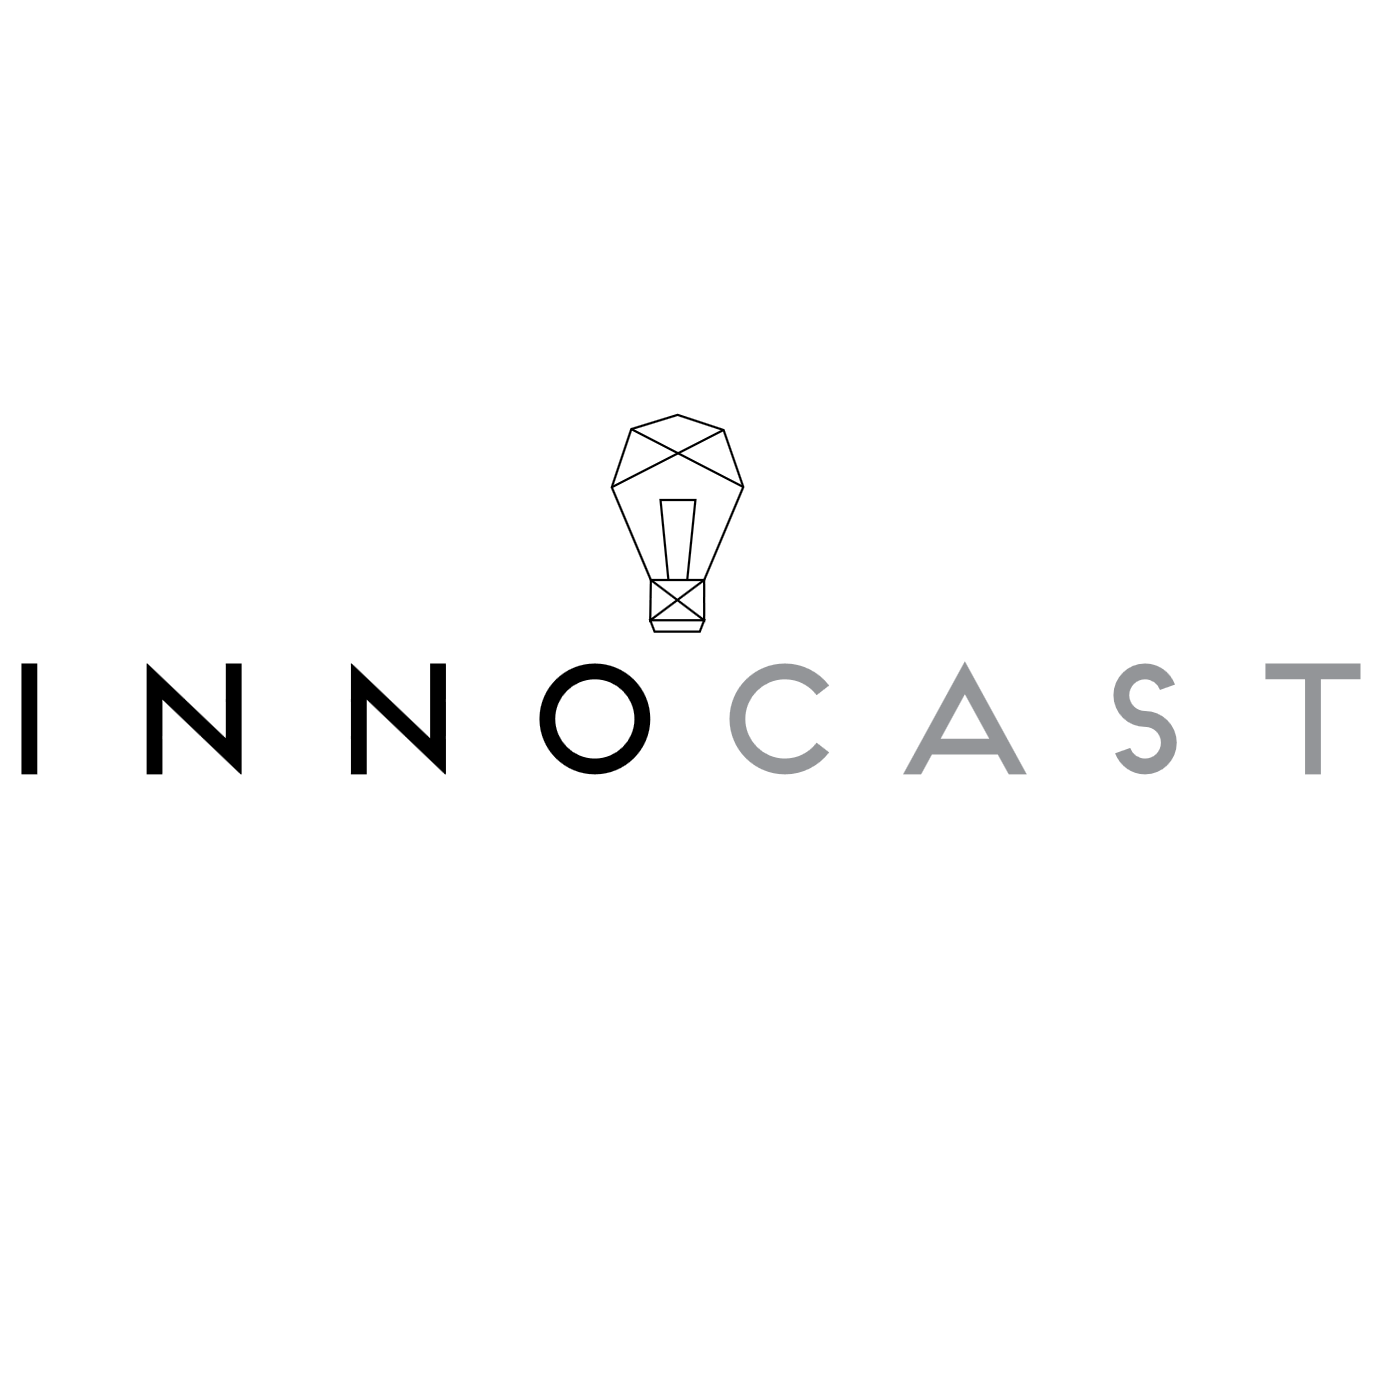 Innocast provides software solutions to support, maintain and enhance your daily business operations.